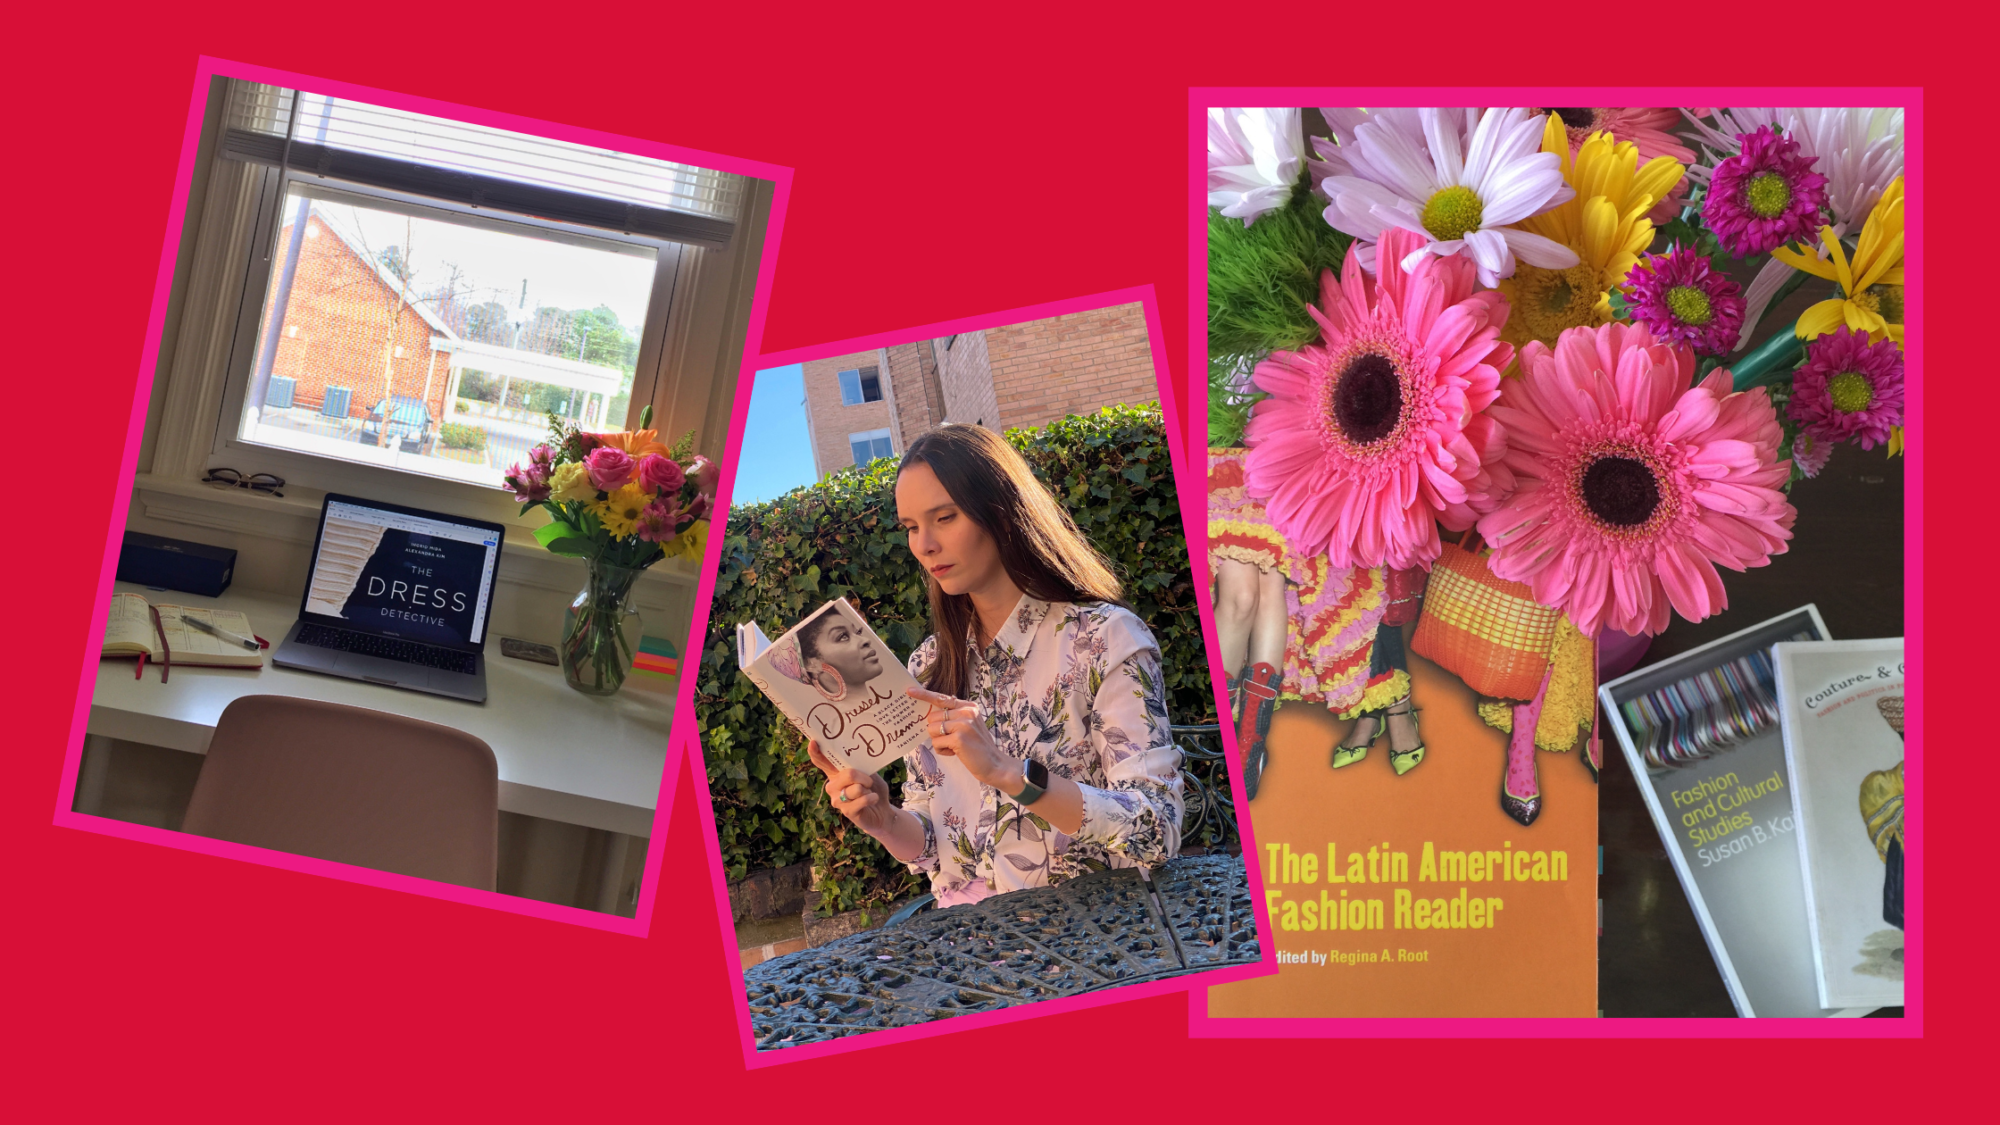 Collage with three photos. The first, on the left, shows a desk in front of a window, on top of which is a vase with flowers and a laptop showing the cover of the book "The Dress Detective" by Ingrid Mida and Alexandra Kim. The photo in the center portrays a woman reading the book "Dressed in Dreams" by Tanisha C. Ford. And the photo on the right has several books stacked on top of each other and flowers. "The Latin American Fashion Reader," edited by Regina Root, is thee most visible book in this photo.